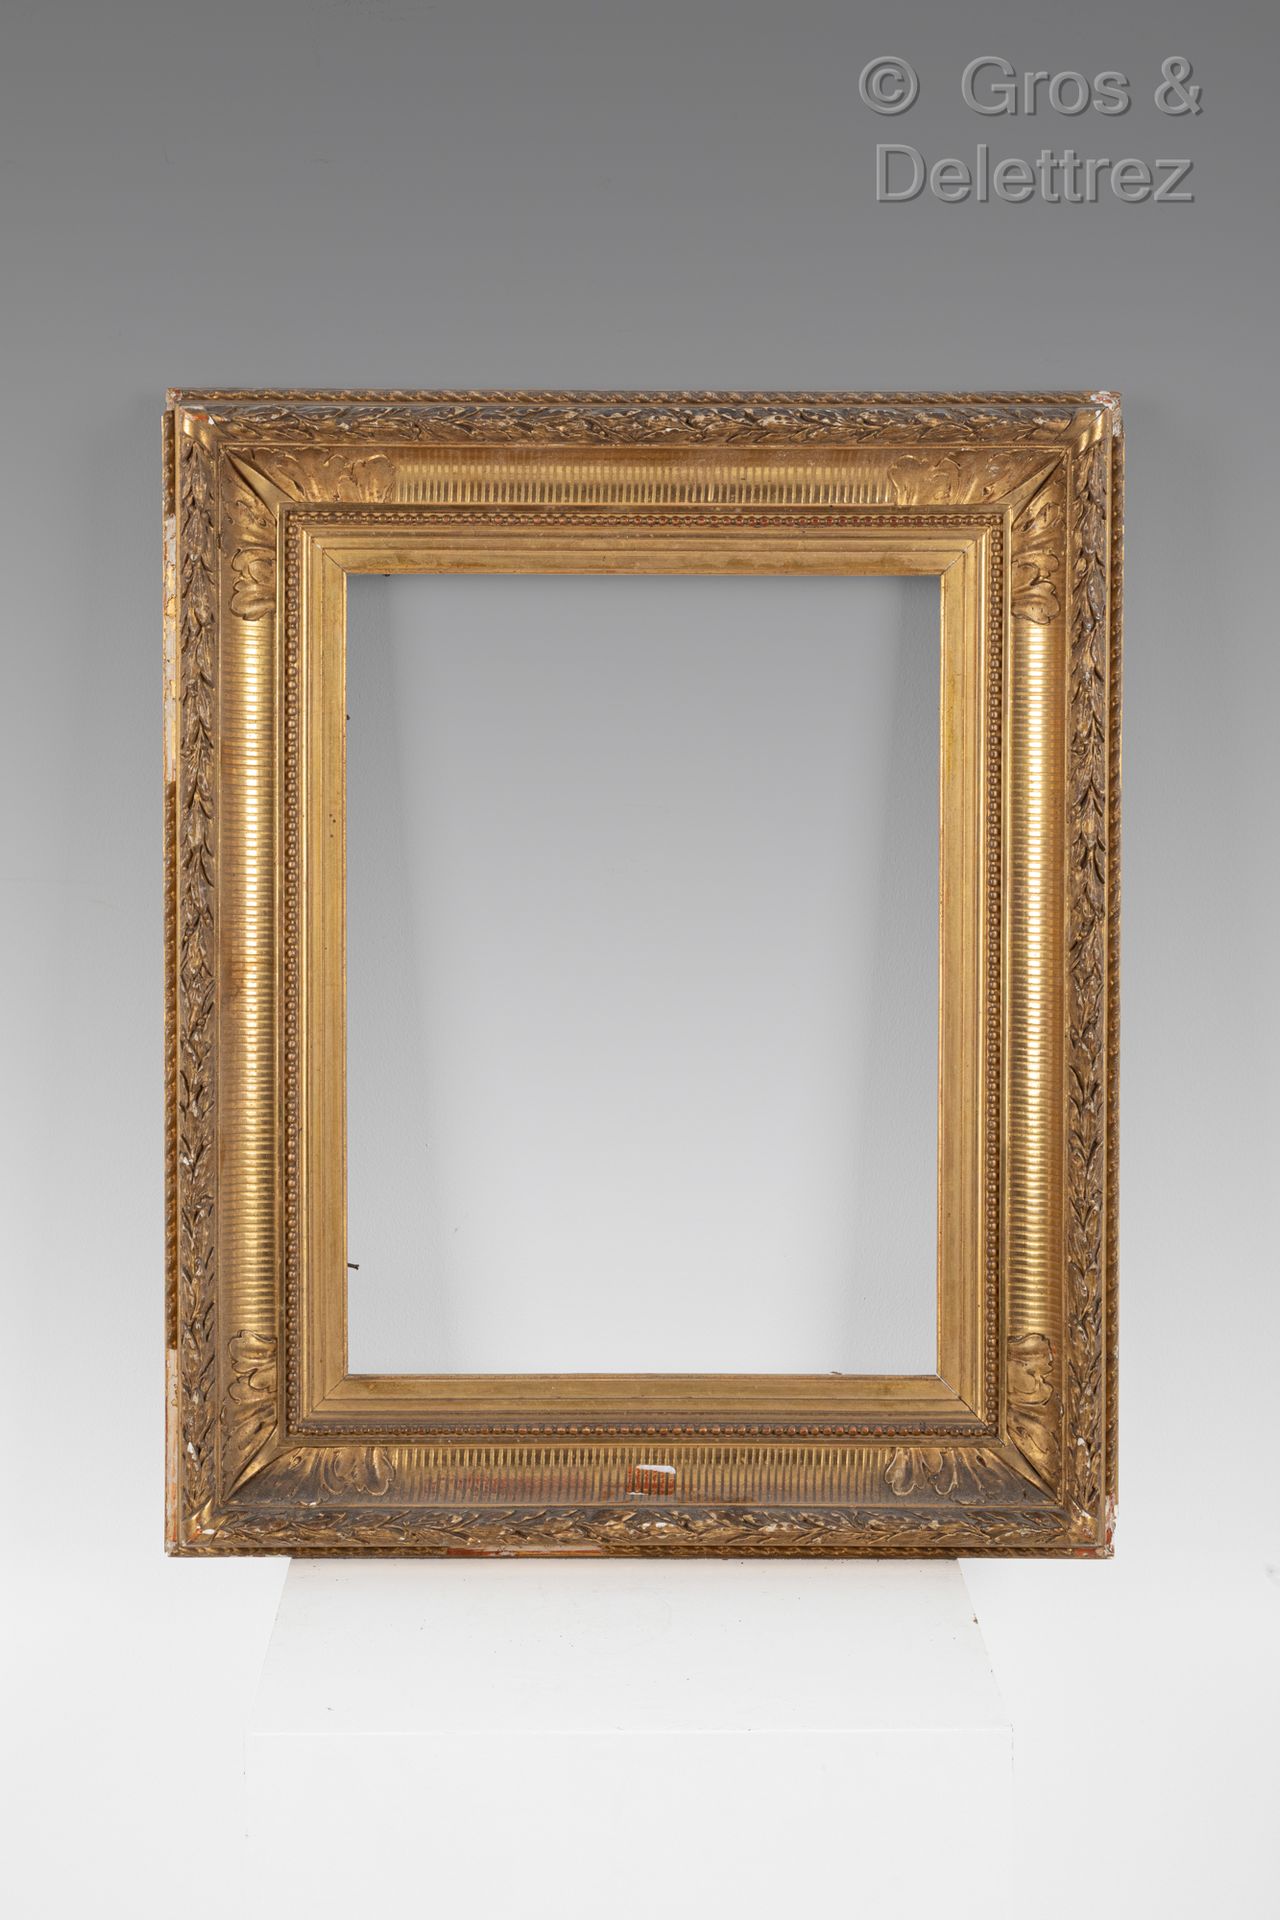 Null Wood and gilded stucco frame decorated with canals, pearls and acanthus lea&hellip;